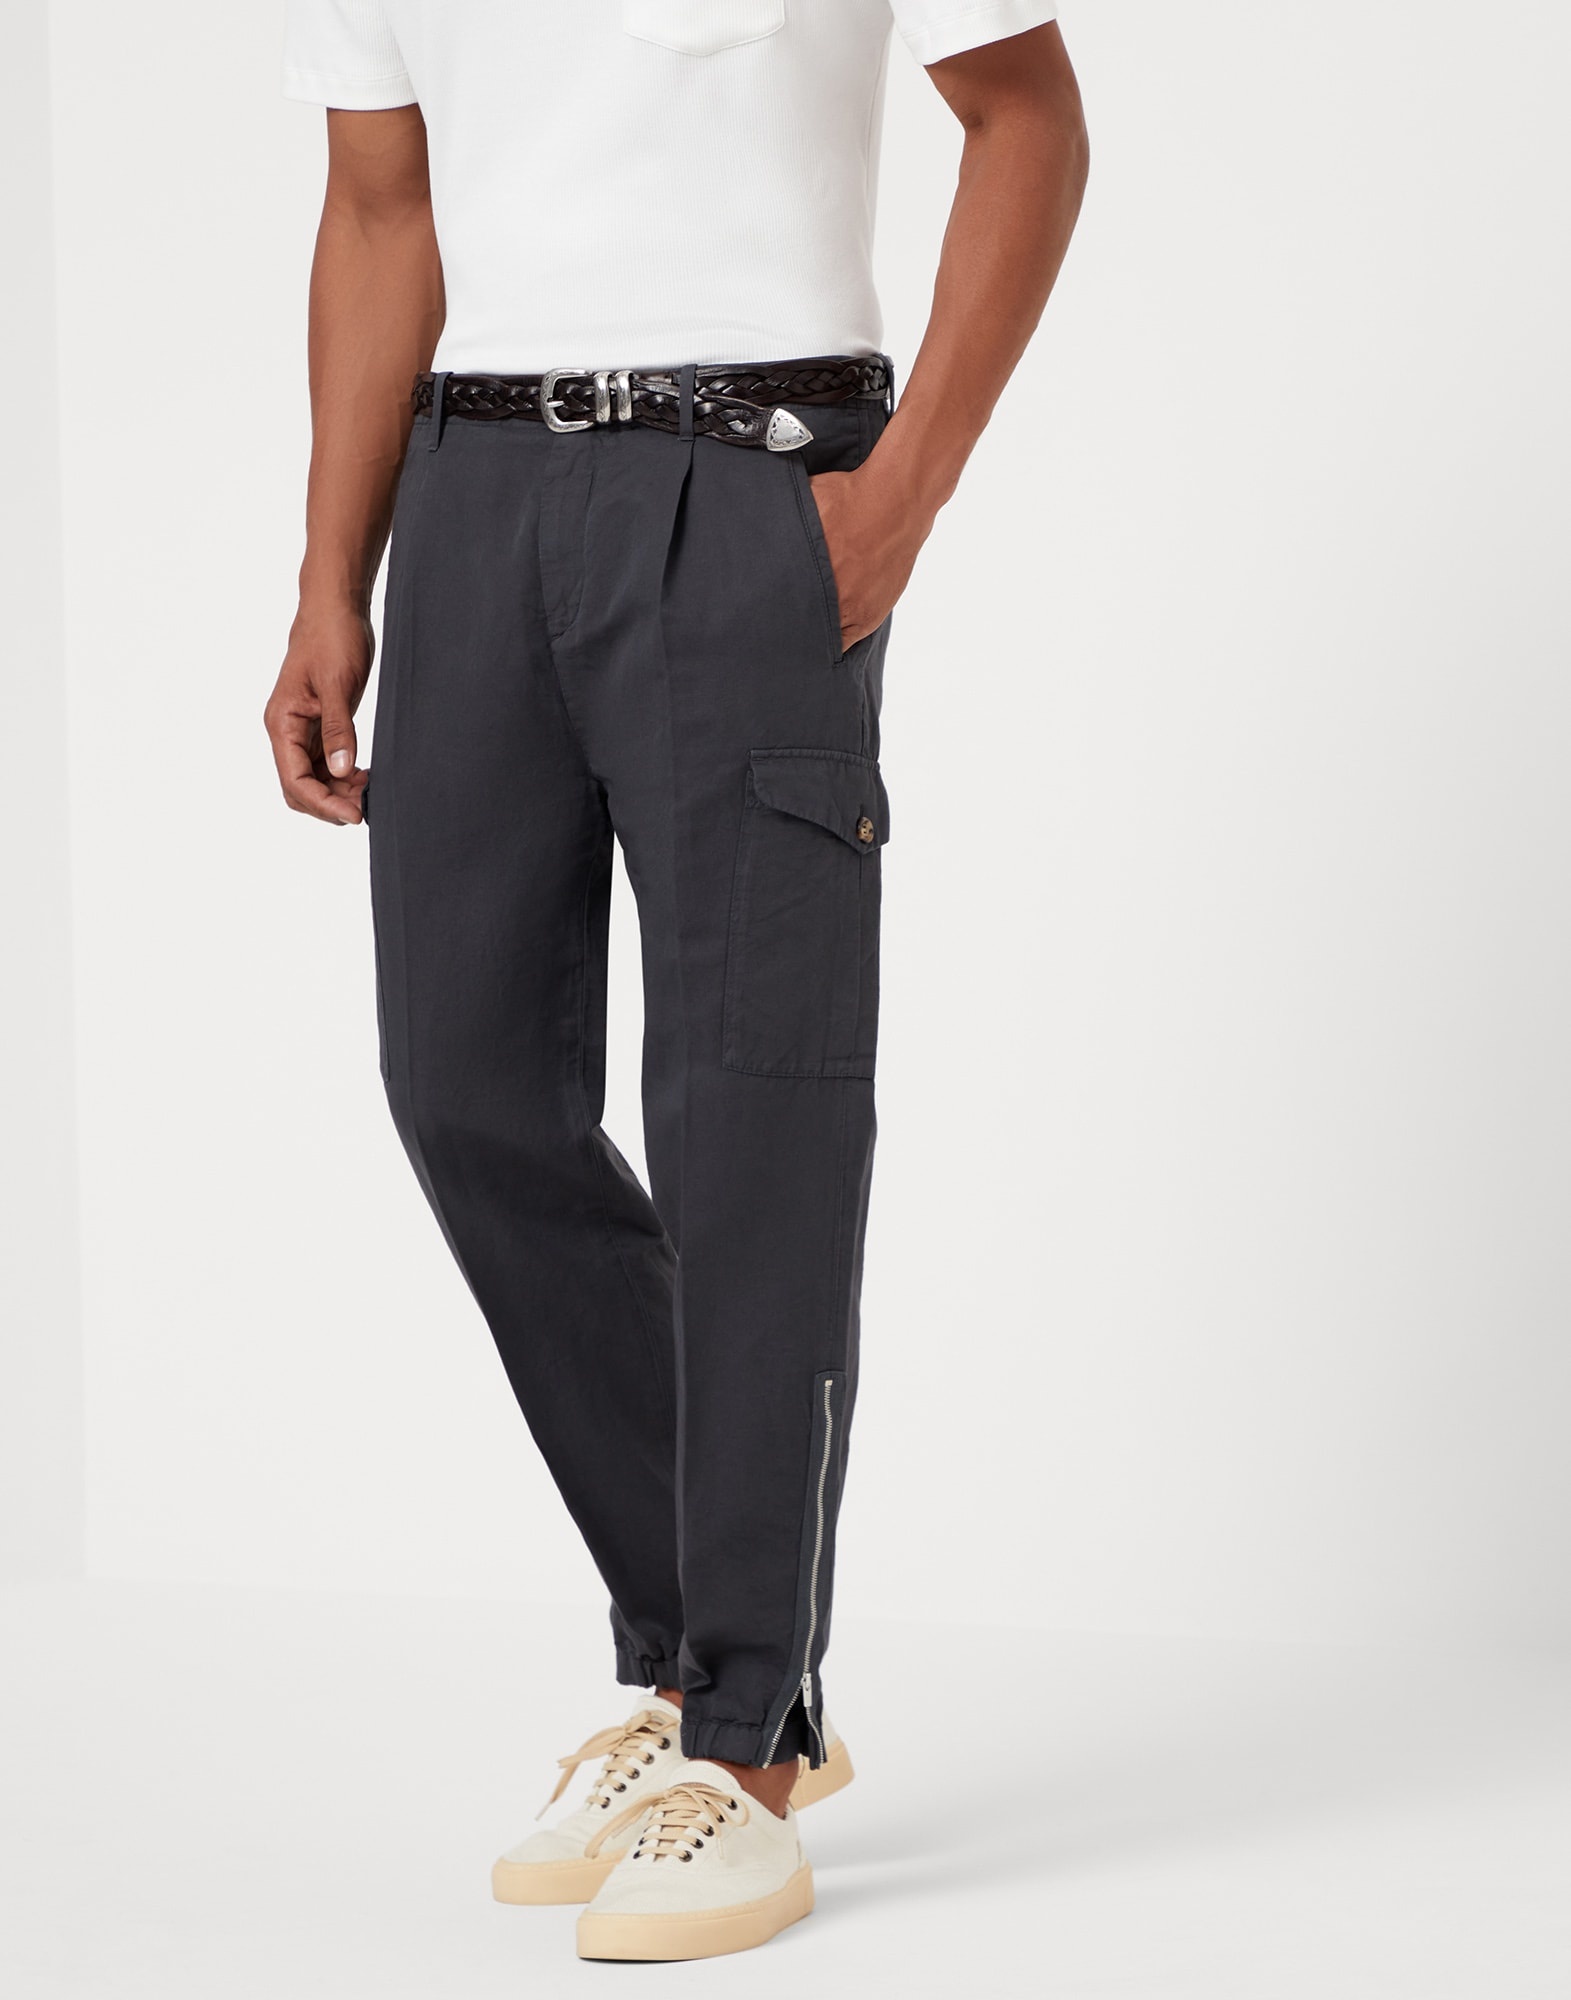 Garment-dyed ergonomic fit trousers in twisted linen and cotton gabardine with pleats, cargo pockets - 1